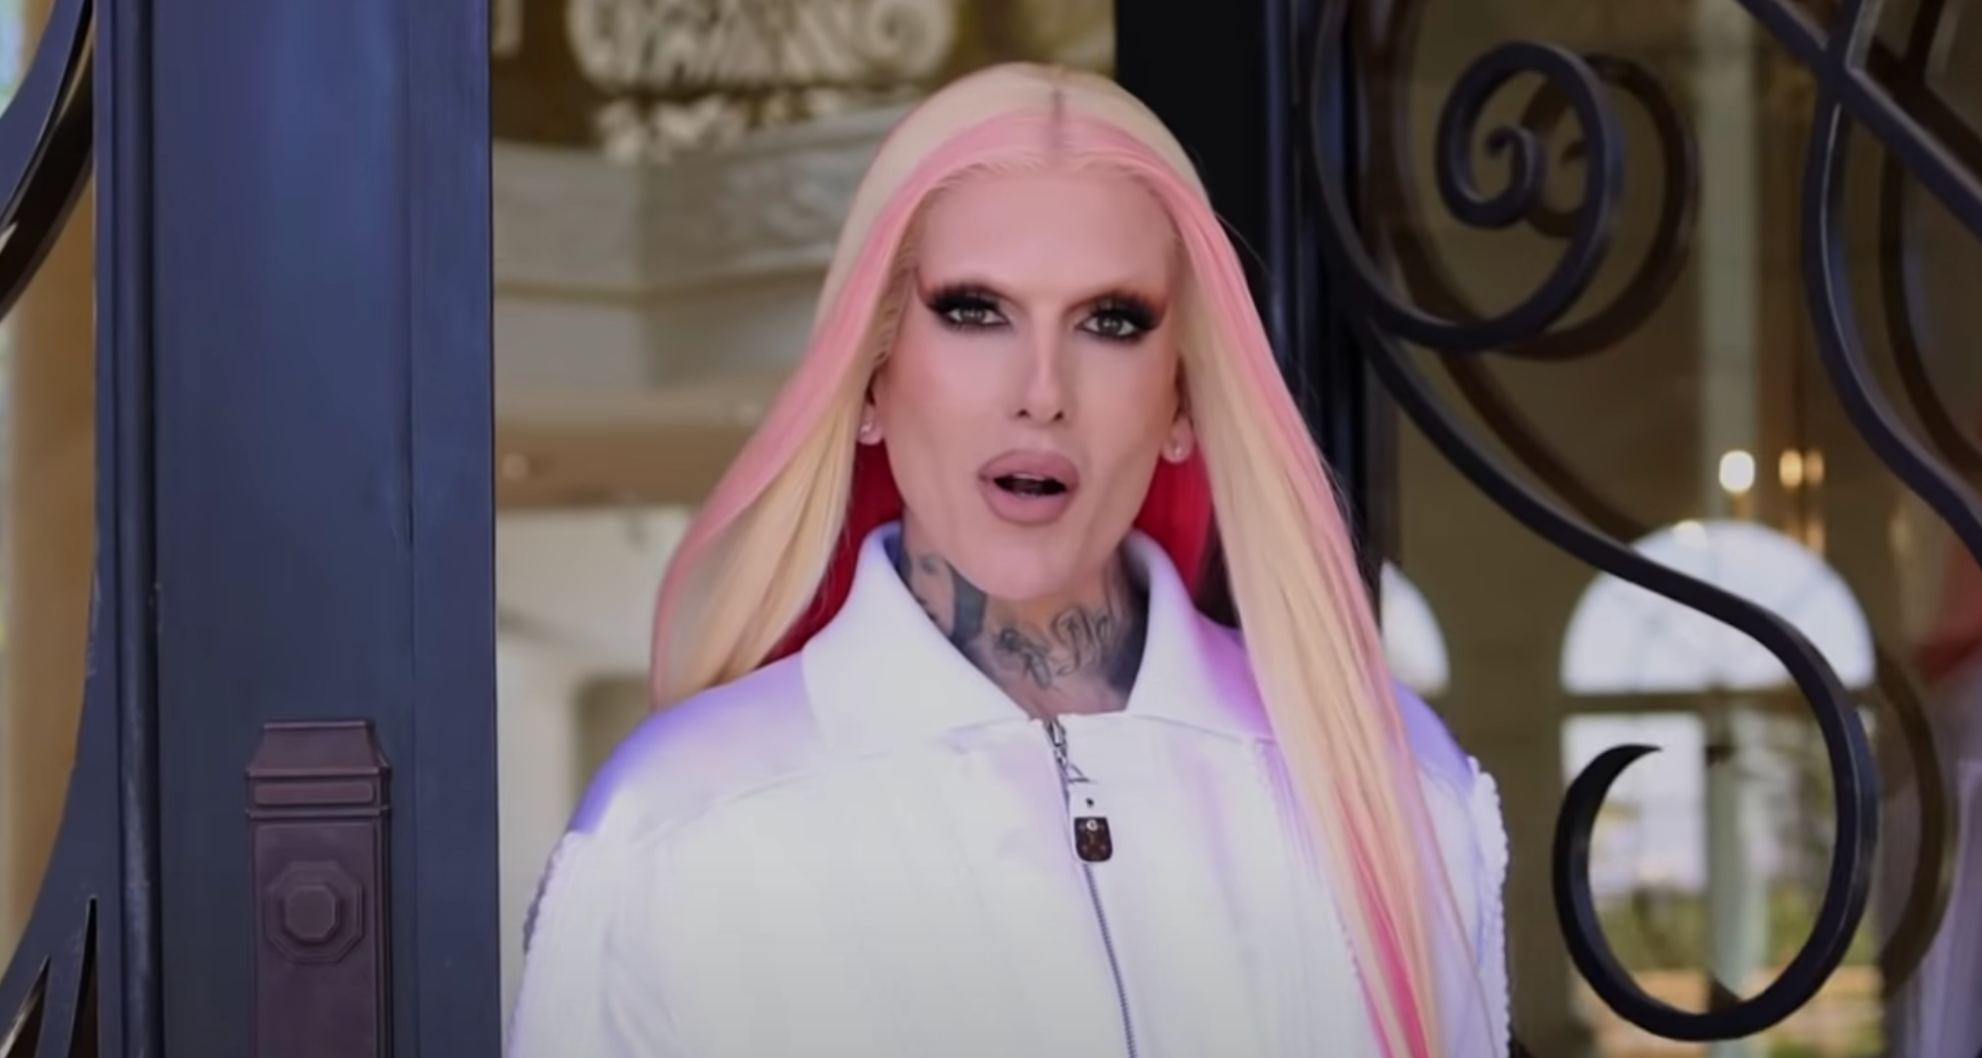 Jeffree Star's Purple Backyard Has Seriously Confused His Followers